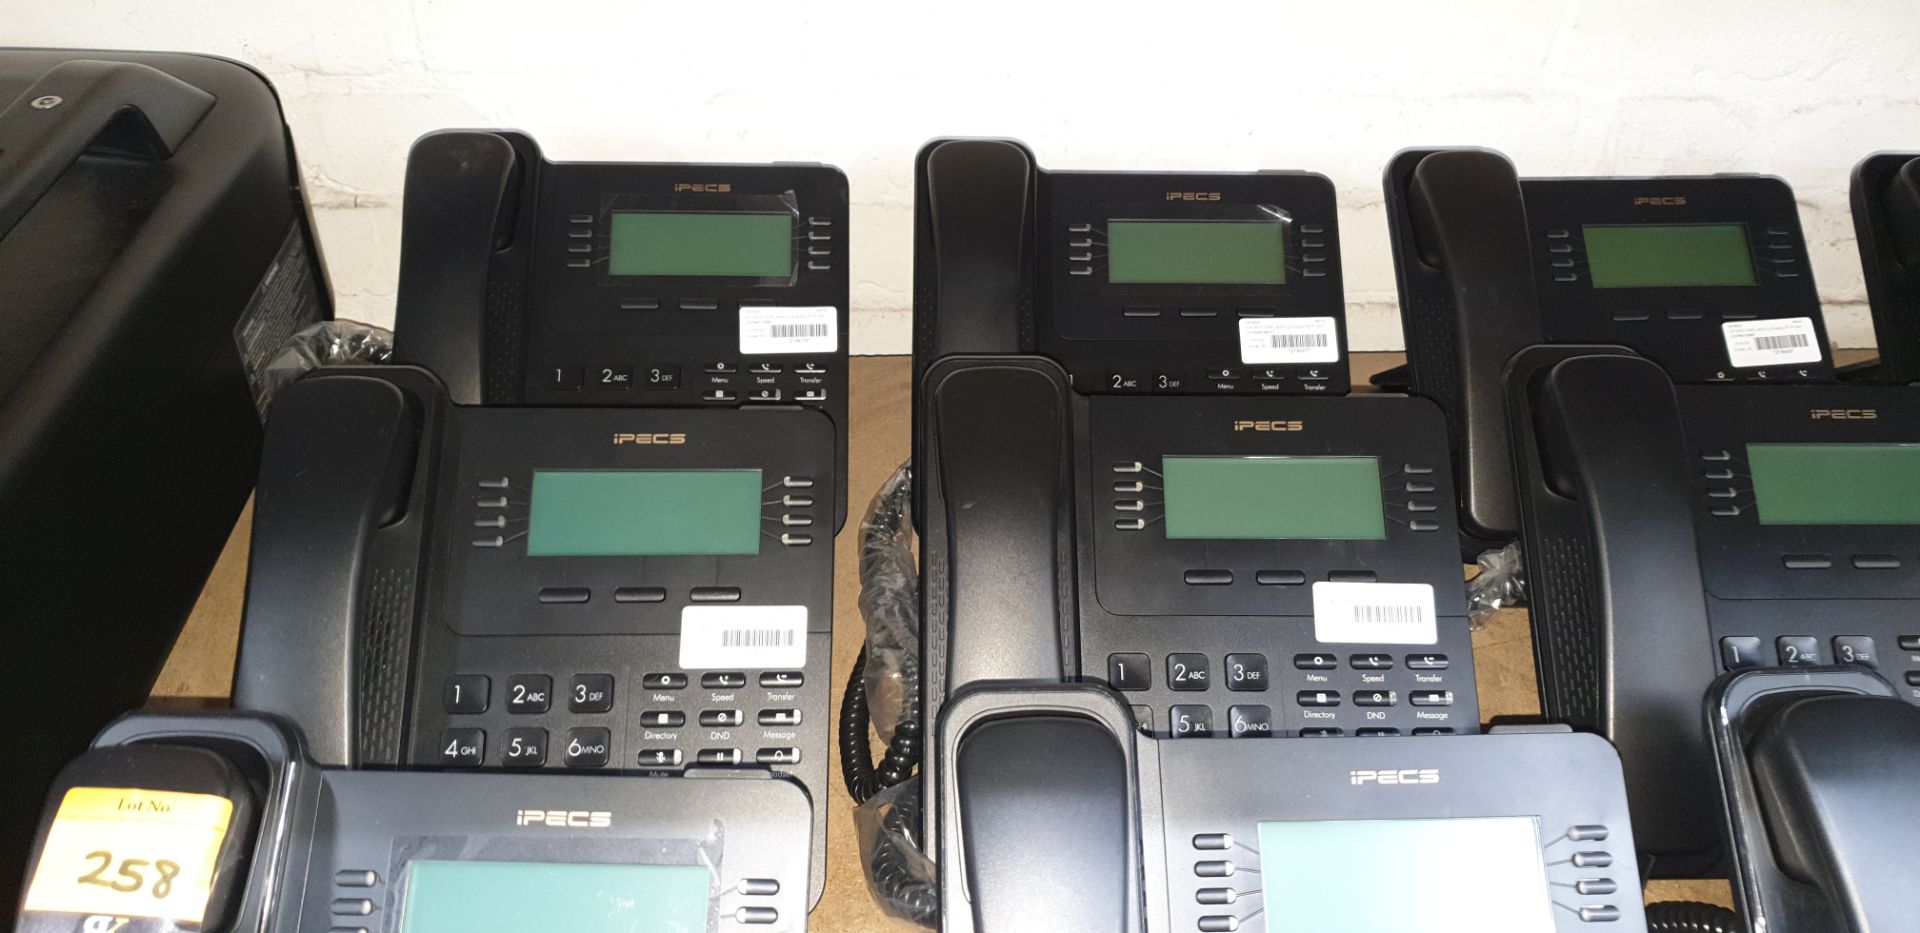 13 off iPECS IP phone handsets, comprising 12 off model LIP-9030 & 1 off LIP model 9020 with 24 butt - Image 3 of 8